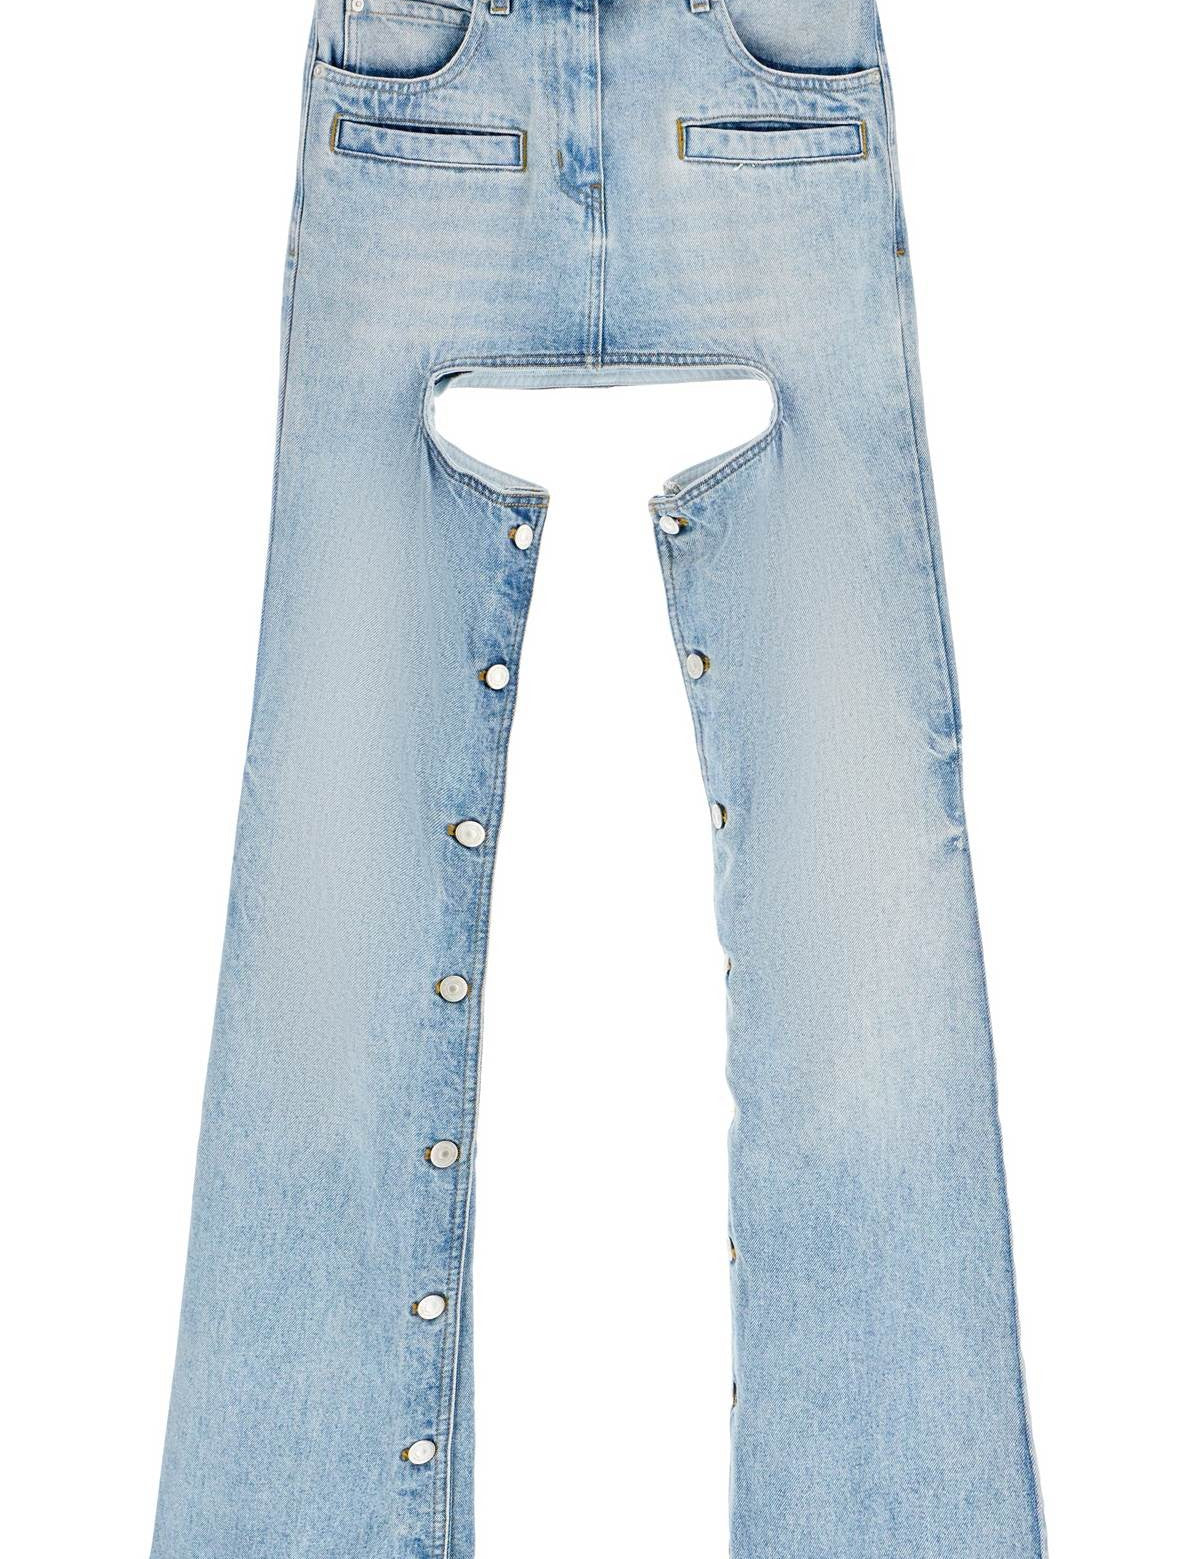 courreges-chaps-jeans-with-cut-out.jpg